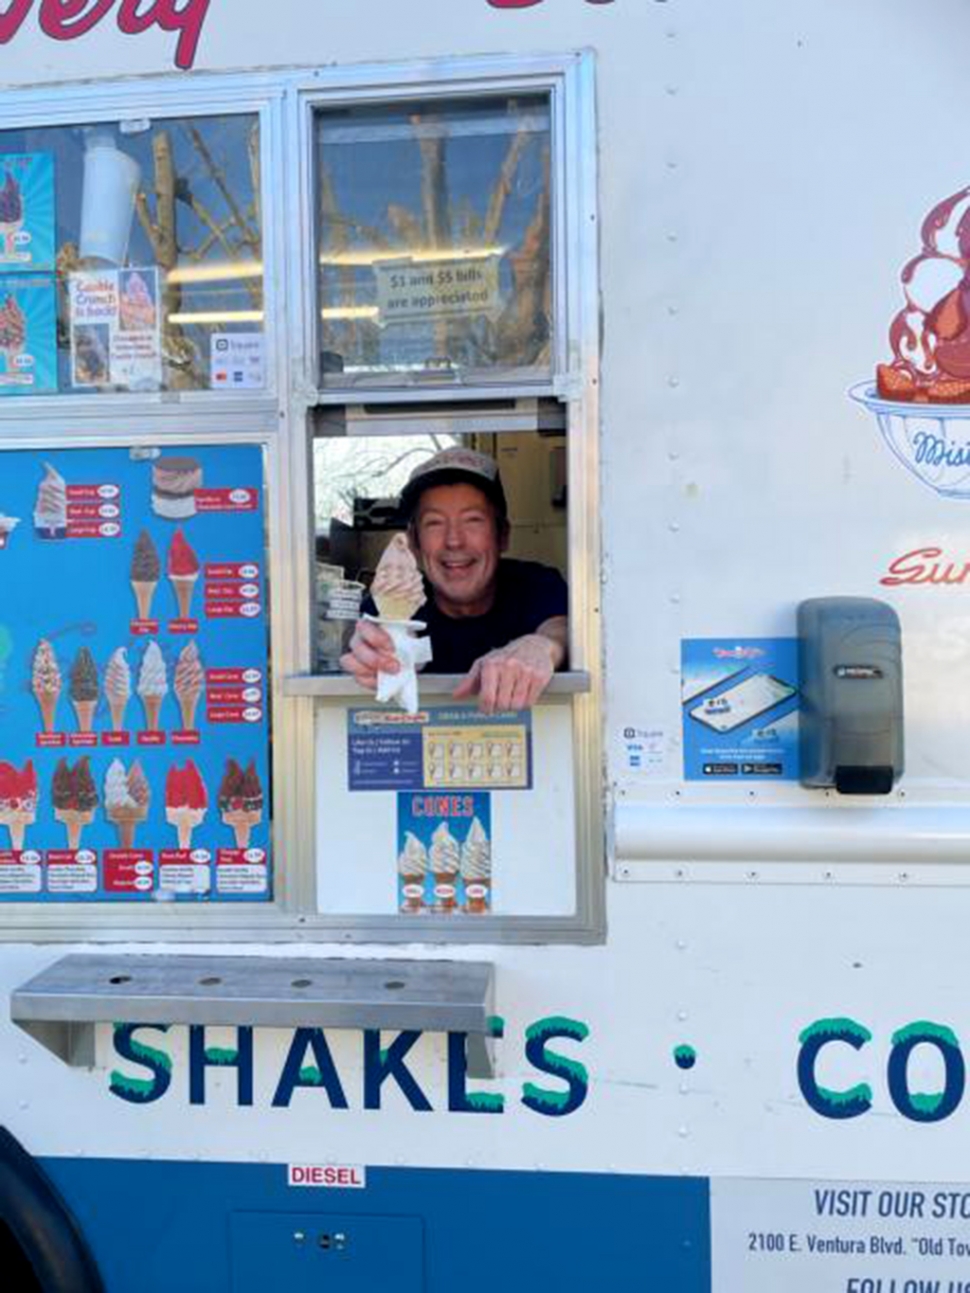 Fillmore’s Jay Morrissey, AKA Mr. Softee, is all smiles handing out a tasty cone. Photo credit Carina Monica Montoya.